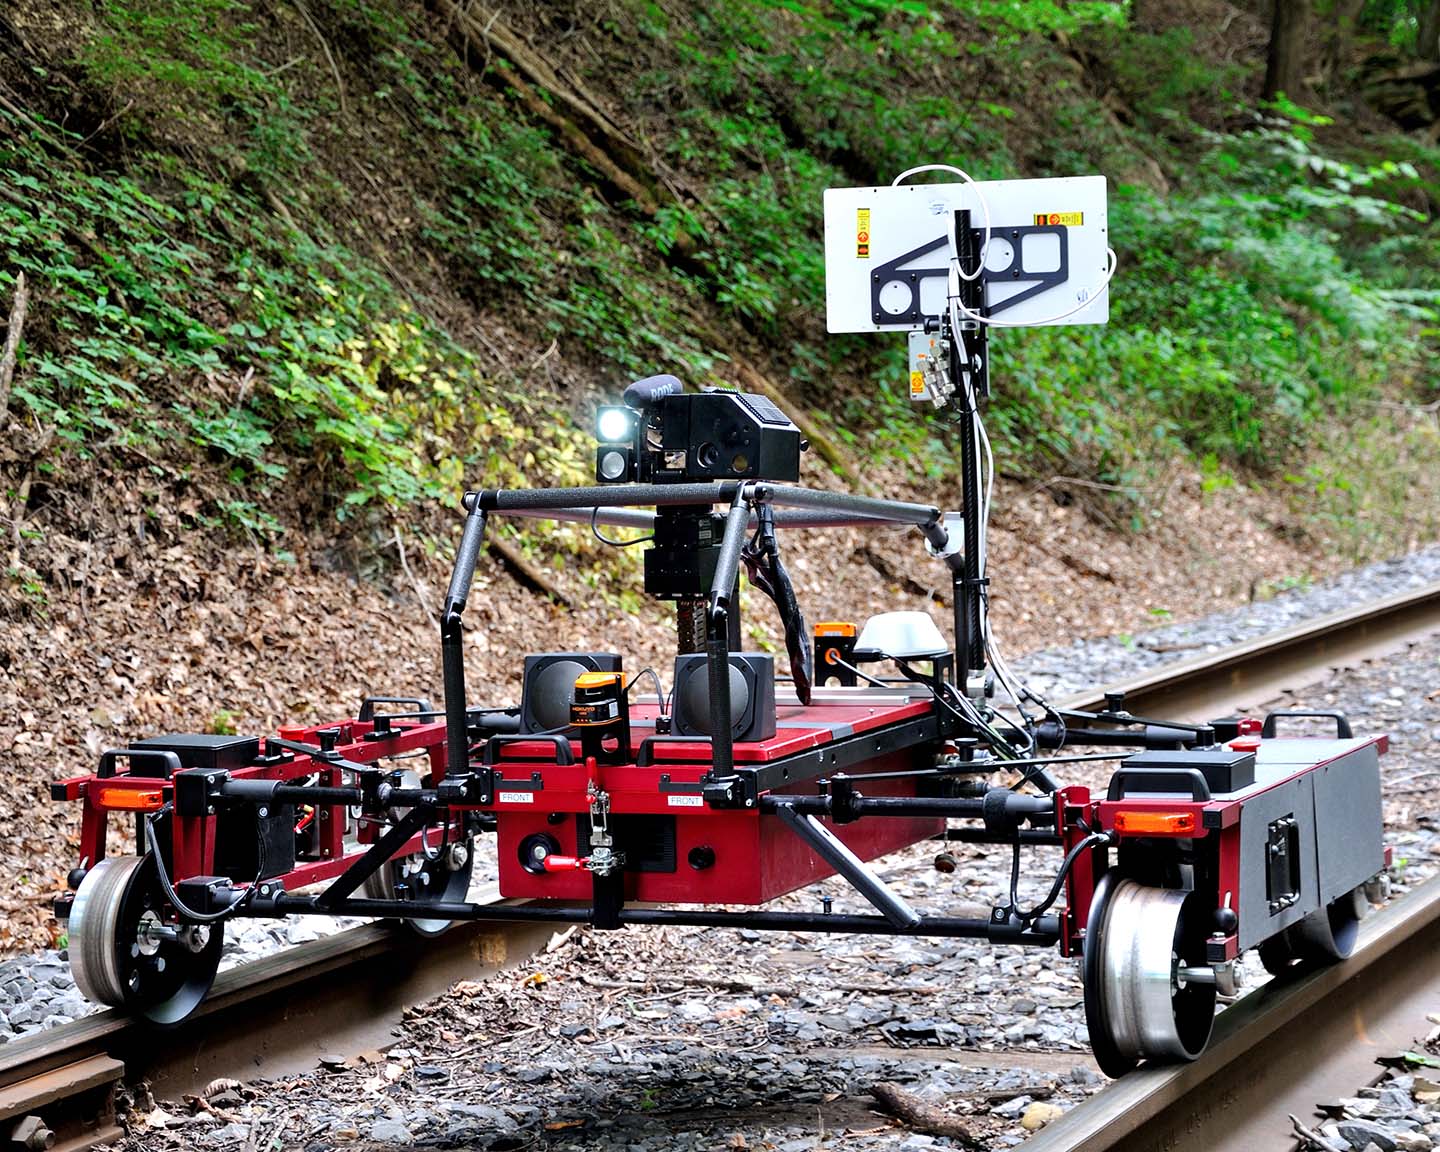 Instrumented Rail Inspection System, or IRiS